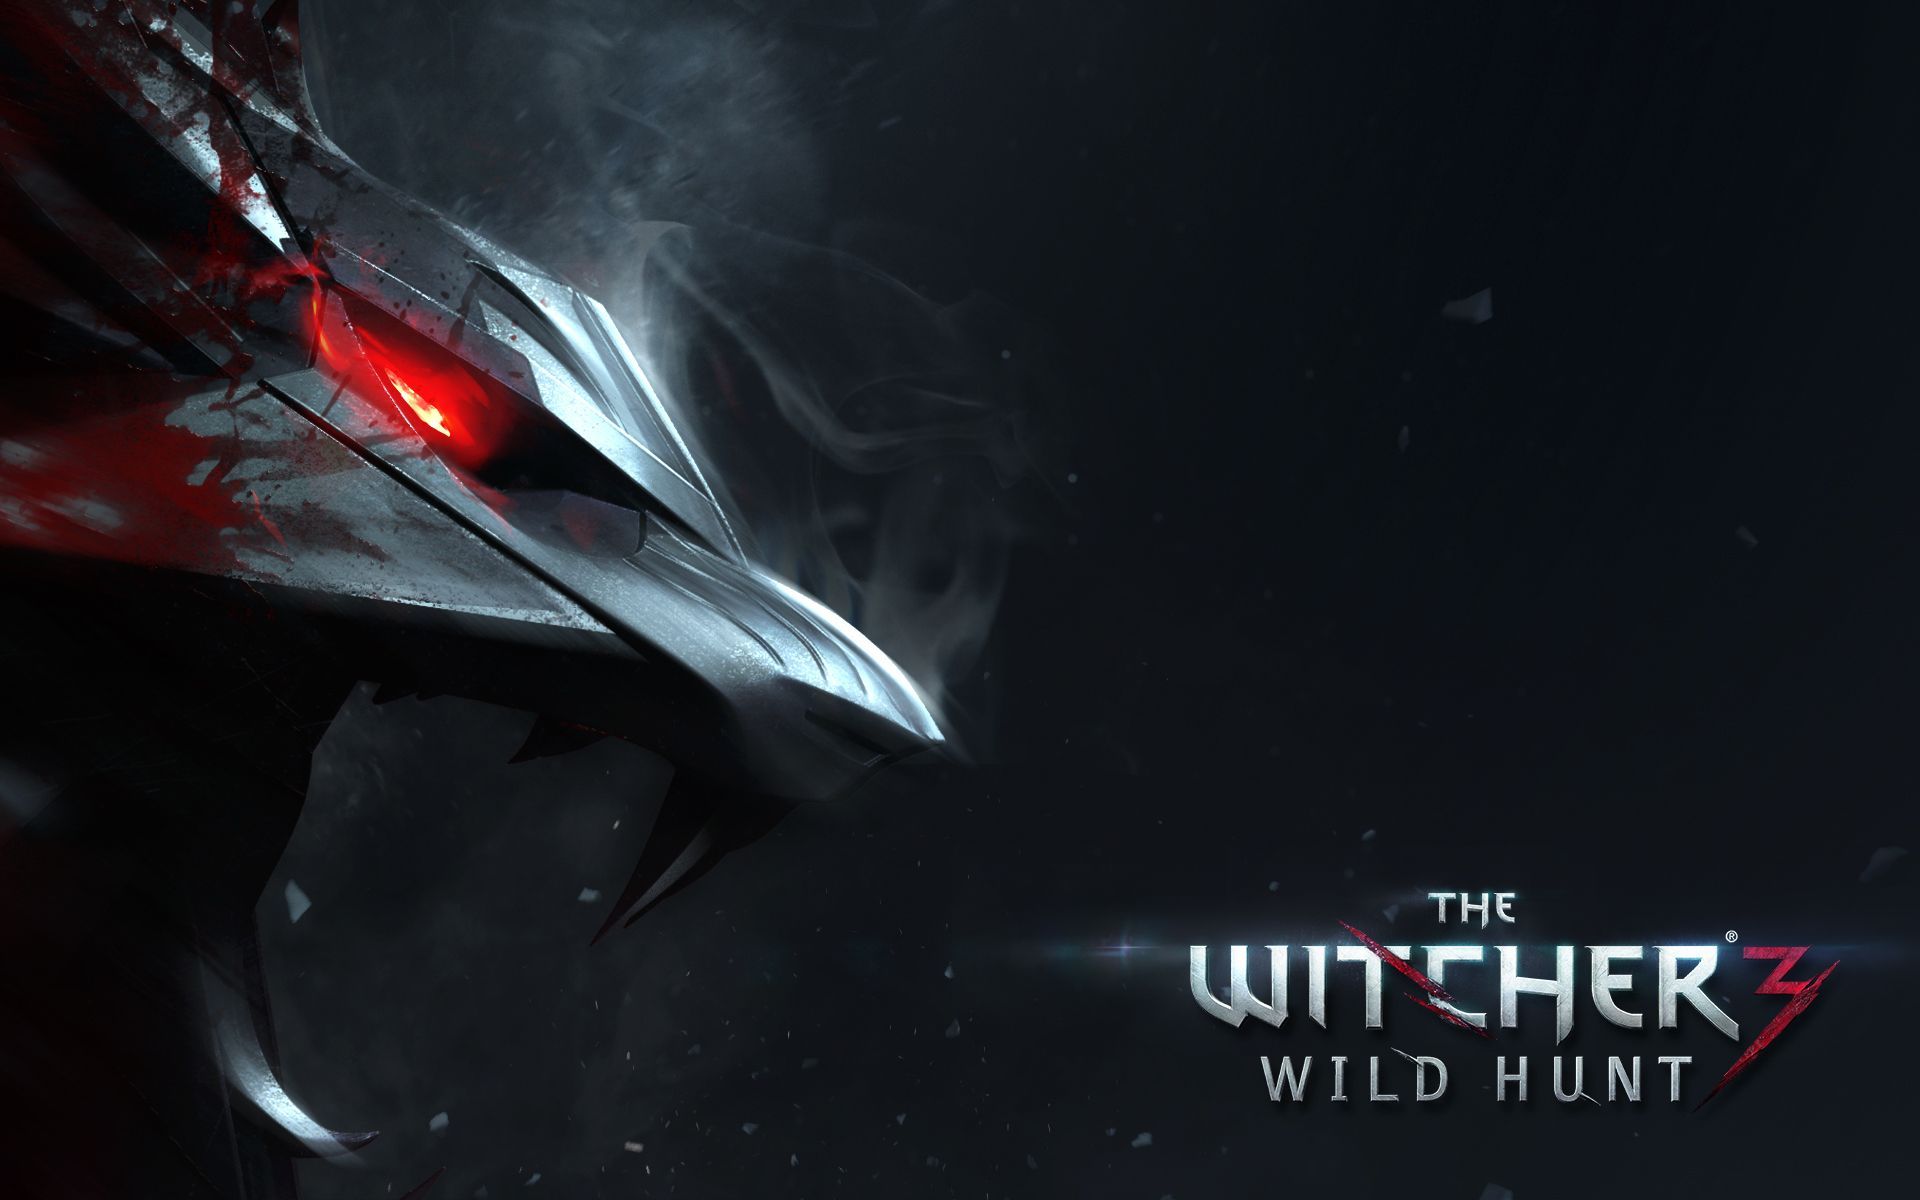 The Witcher 3 Wild Hunt Wallpapers HD Backgrounds